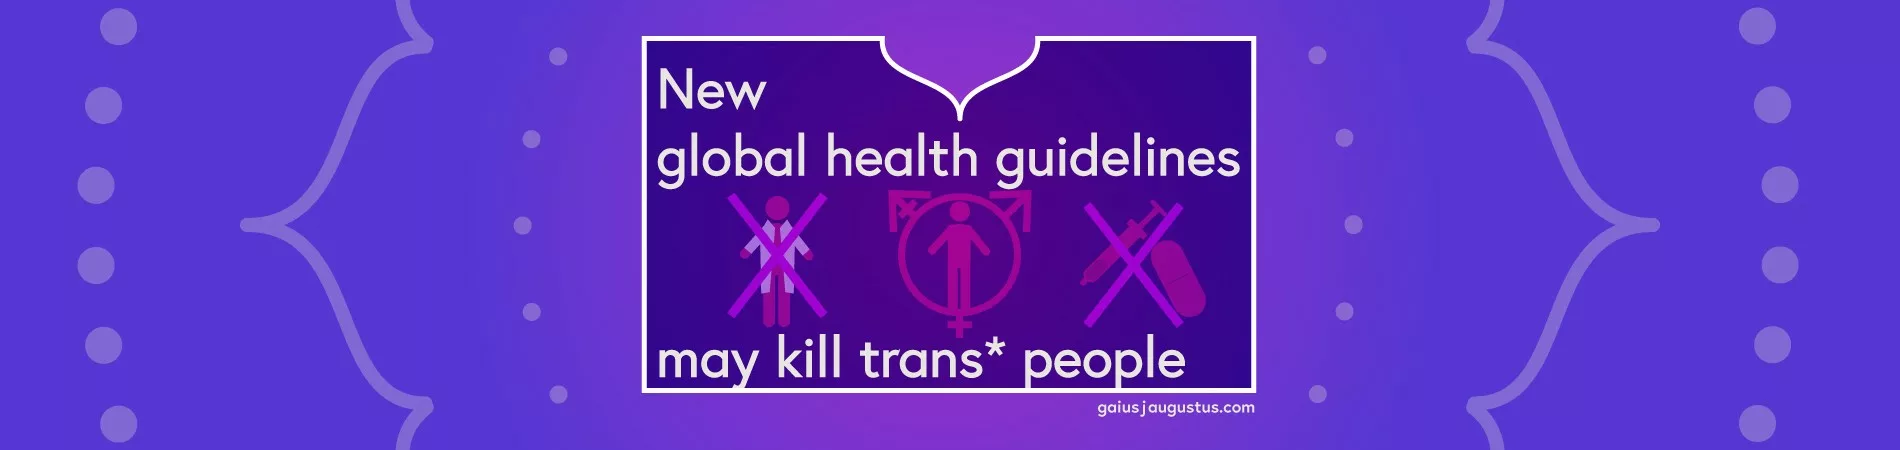 New global health guidelines may kill trans people